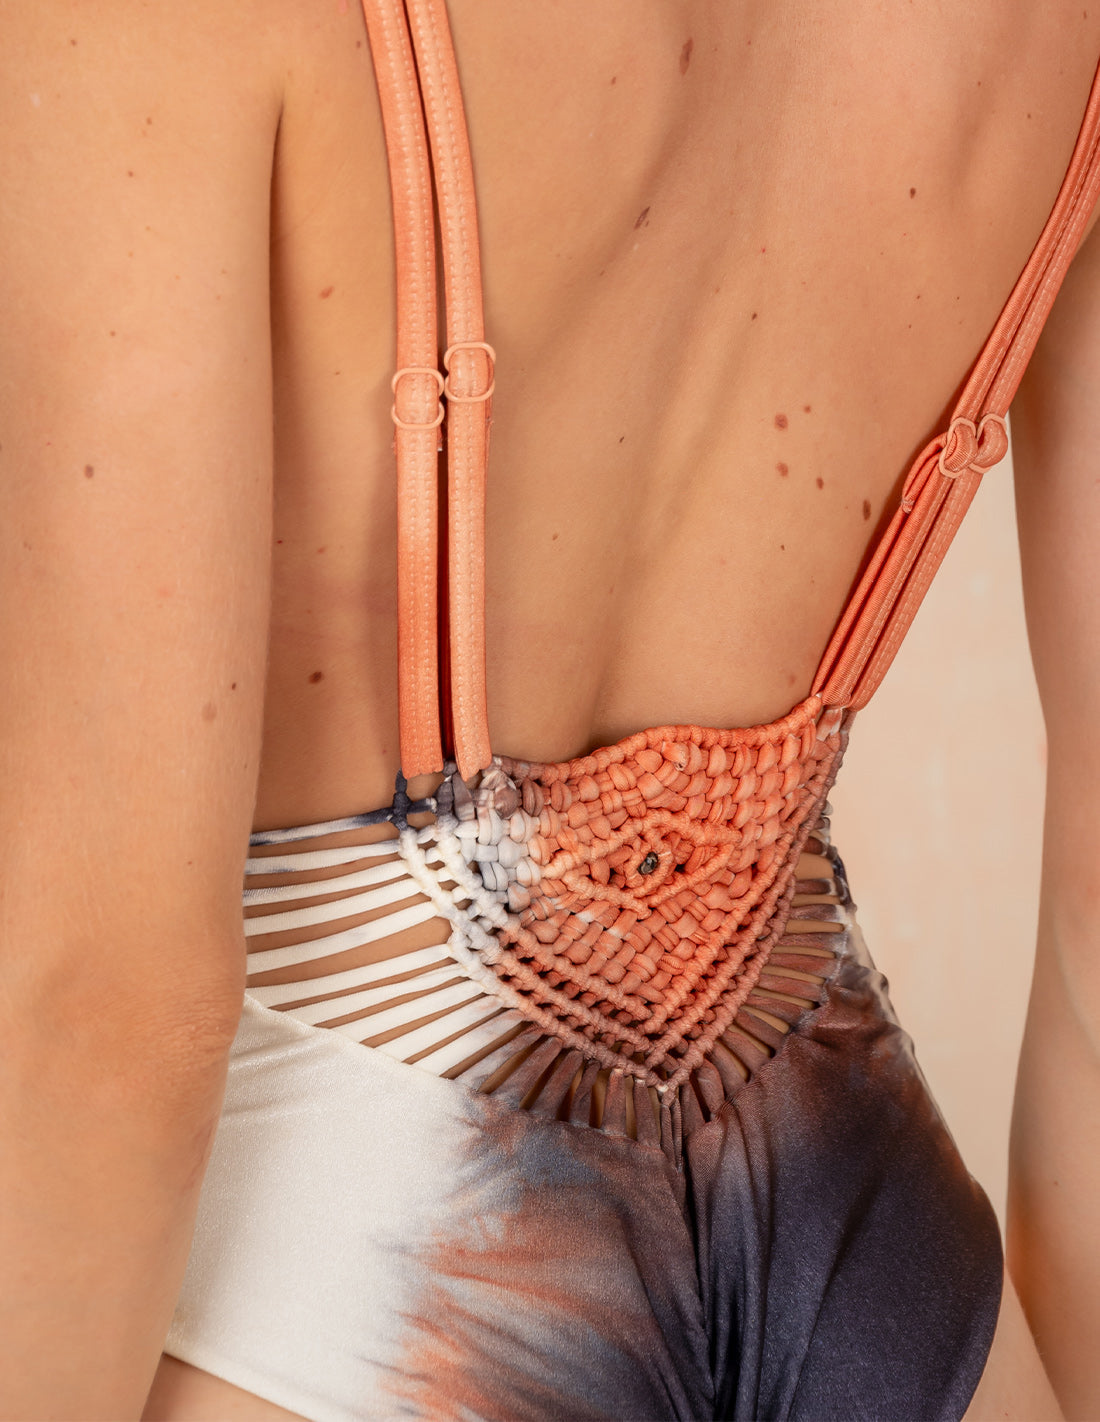 Ocus One-Piece Salmon + Black. Hand-Dyed One-Piece Swimsuit With Hand Woven Macramé In Salmon + Black. Entreaguas